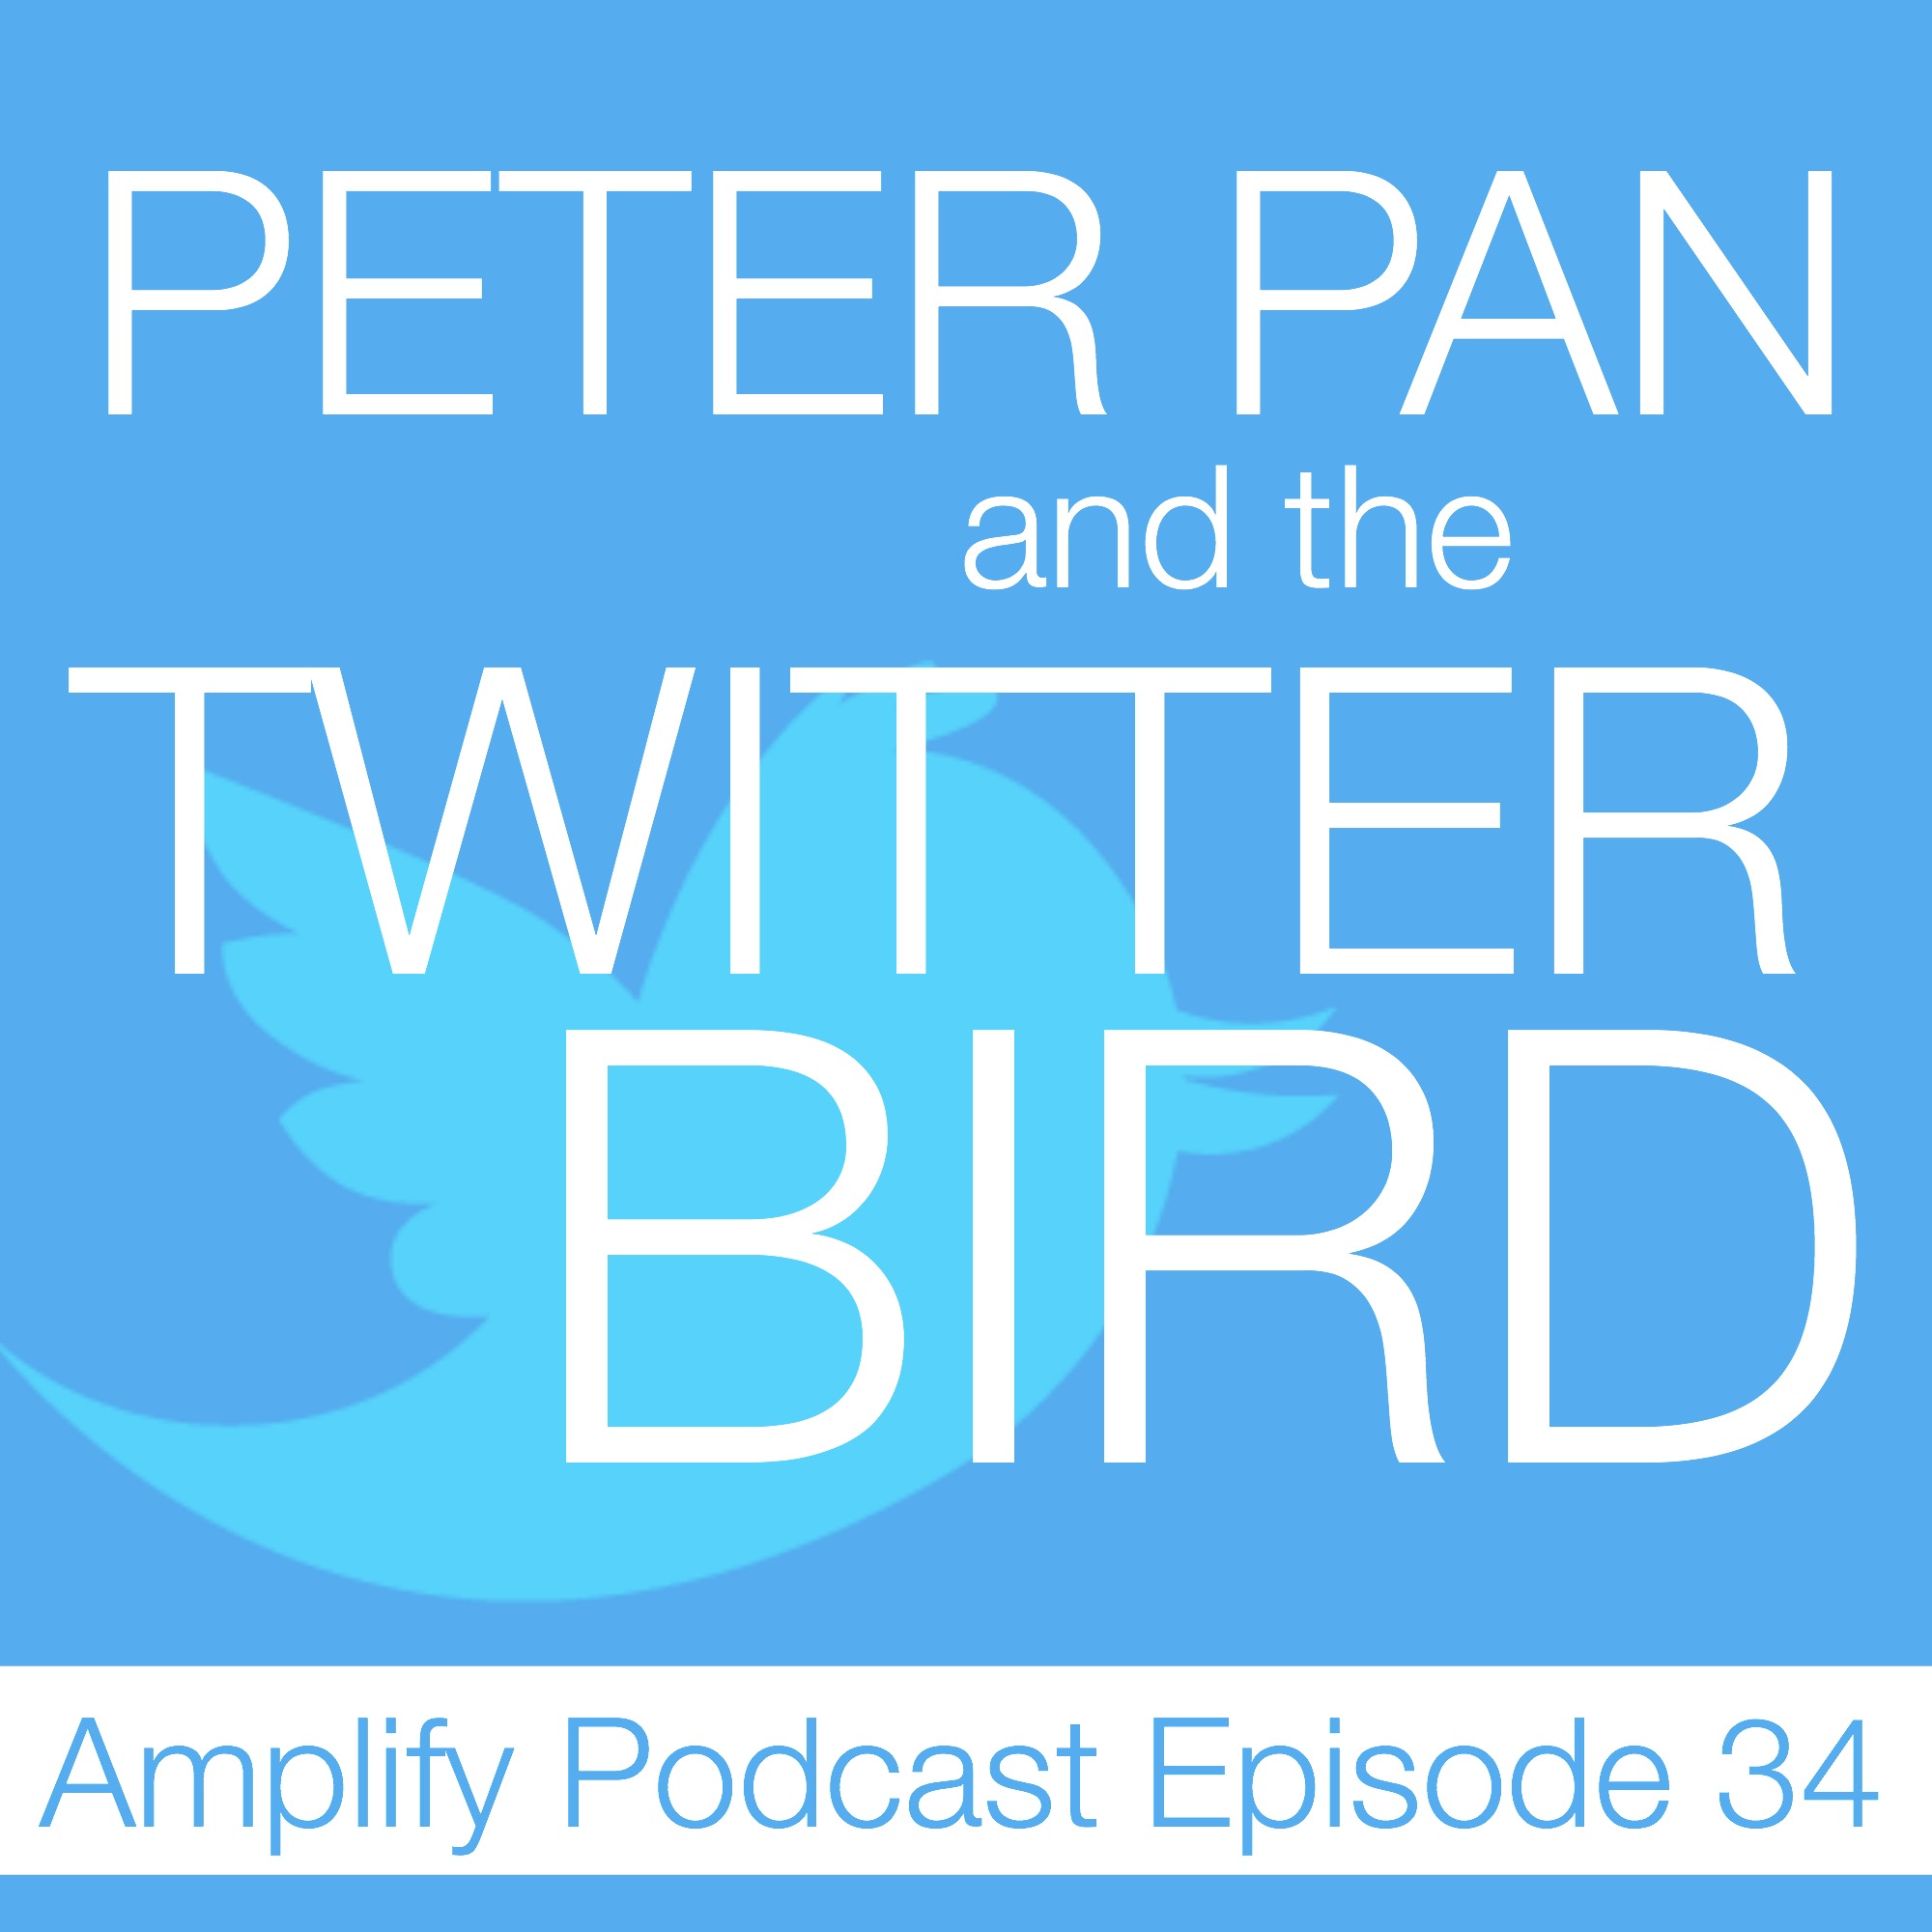 You are currently viewing Peter Pan and the Twitter Bird